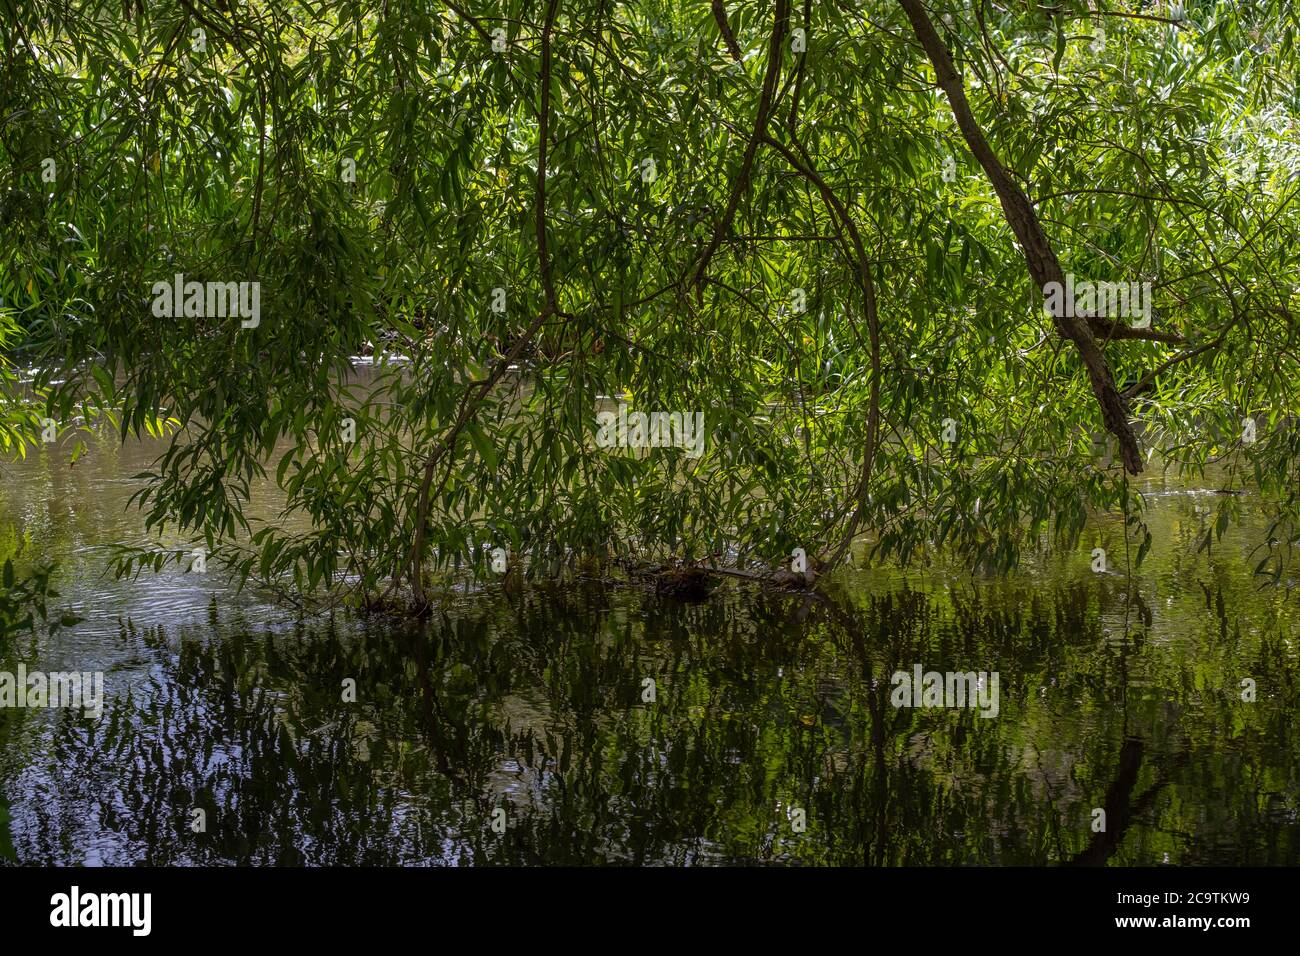 Sunlight through the foliage of a Weeping Willow tree at the River Gade in Cassiobury Park, Watford, Herfordshire England Stock Photo